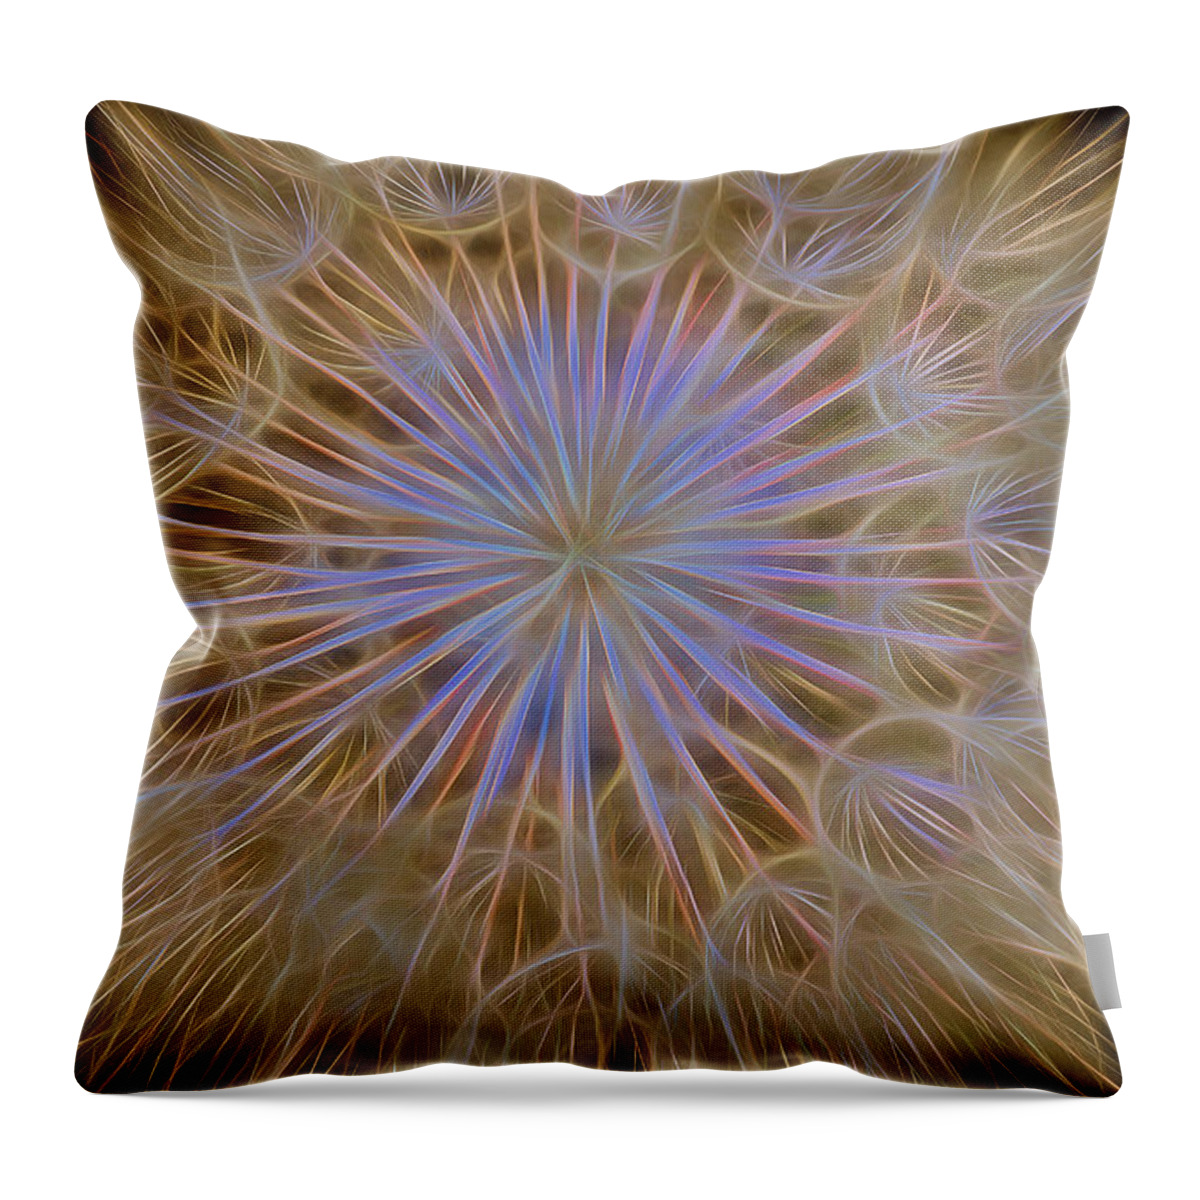 Dandelion Throw Pillow featuring the photograph Psychedelic Dandelion Art by James BO Insogna